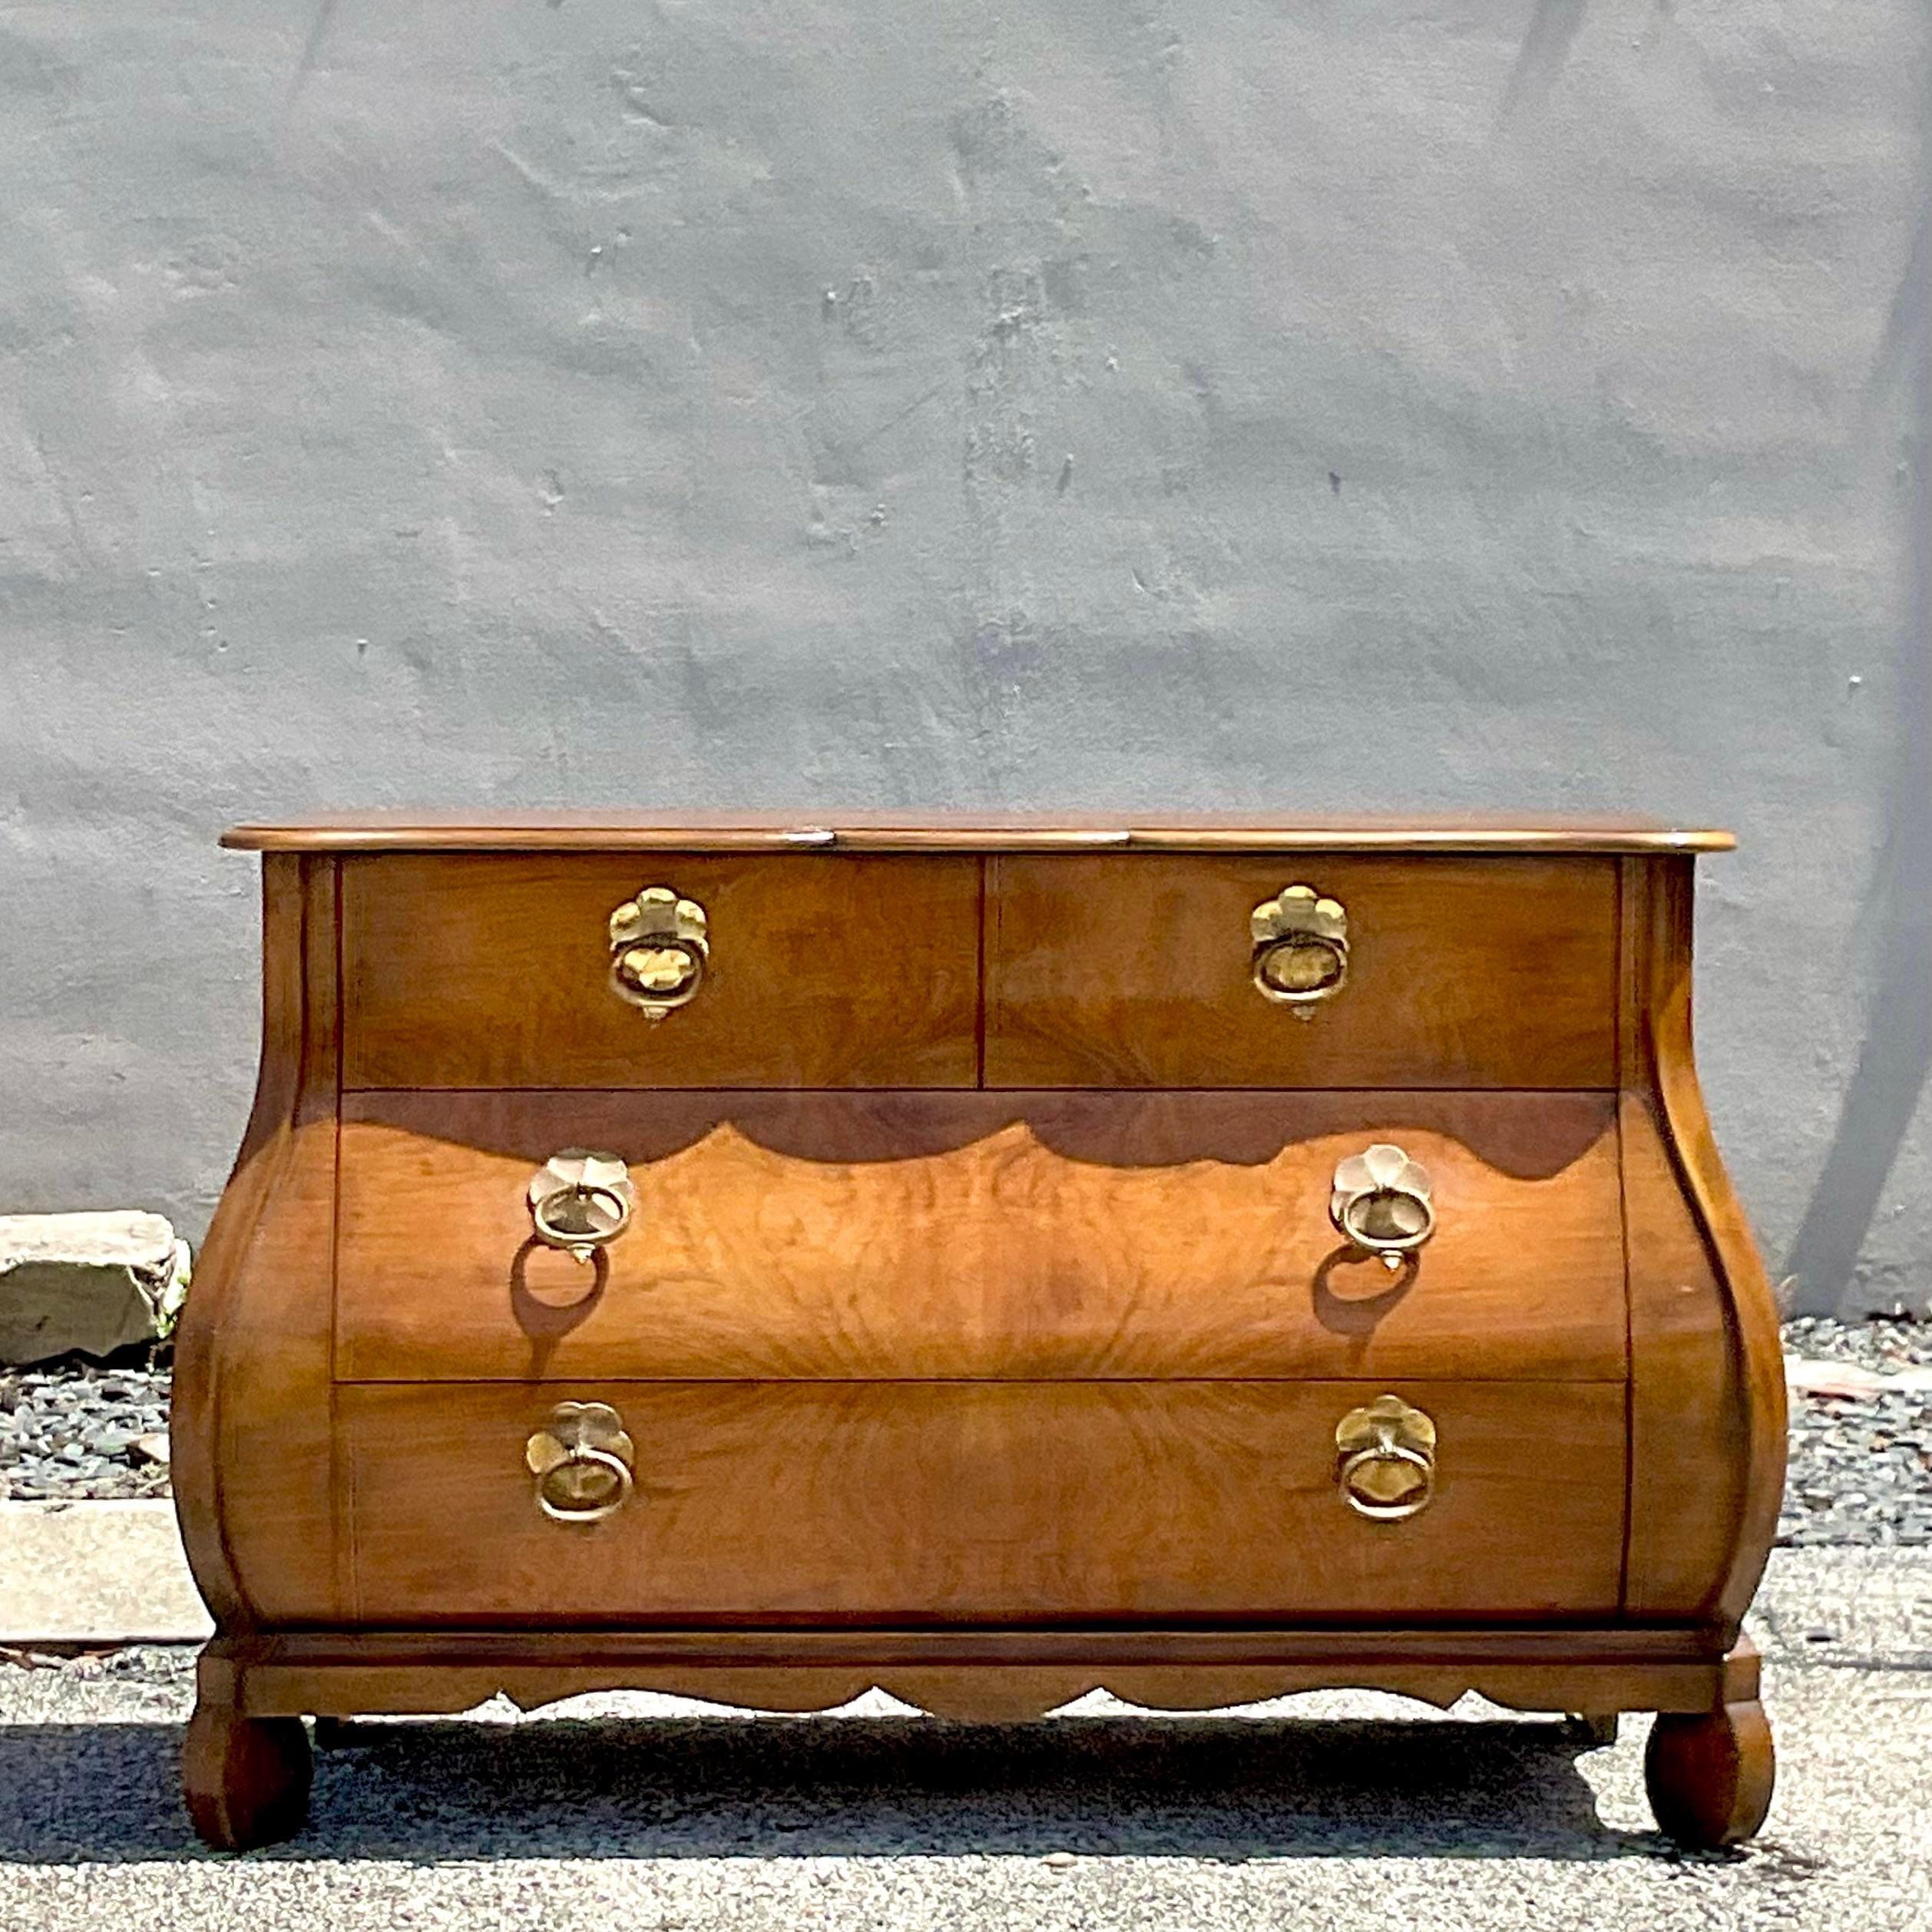 A fabulous vintage Regency chest of drawers. A beautiful Bombe front with a scalloped apron along the bottom. Made by the iconic Baker Furniture group. Marked inside the drawer. Acquired from a Palm Beach estate.